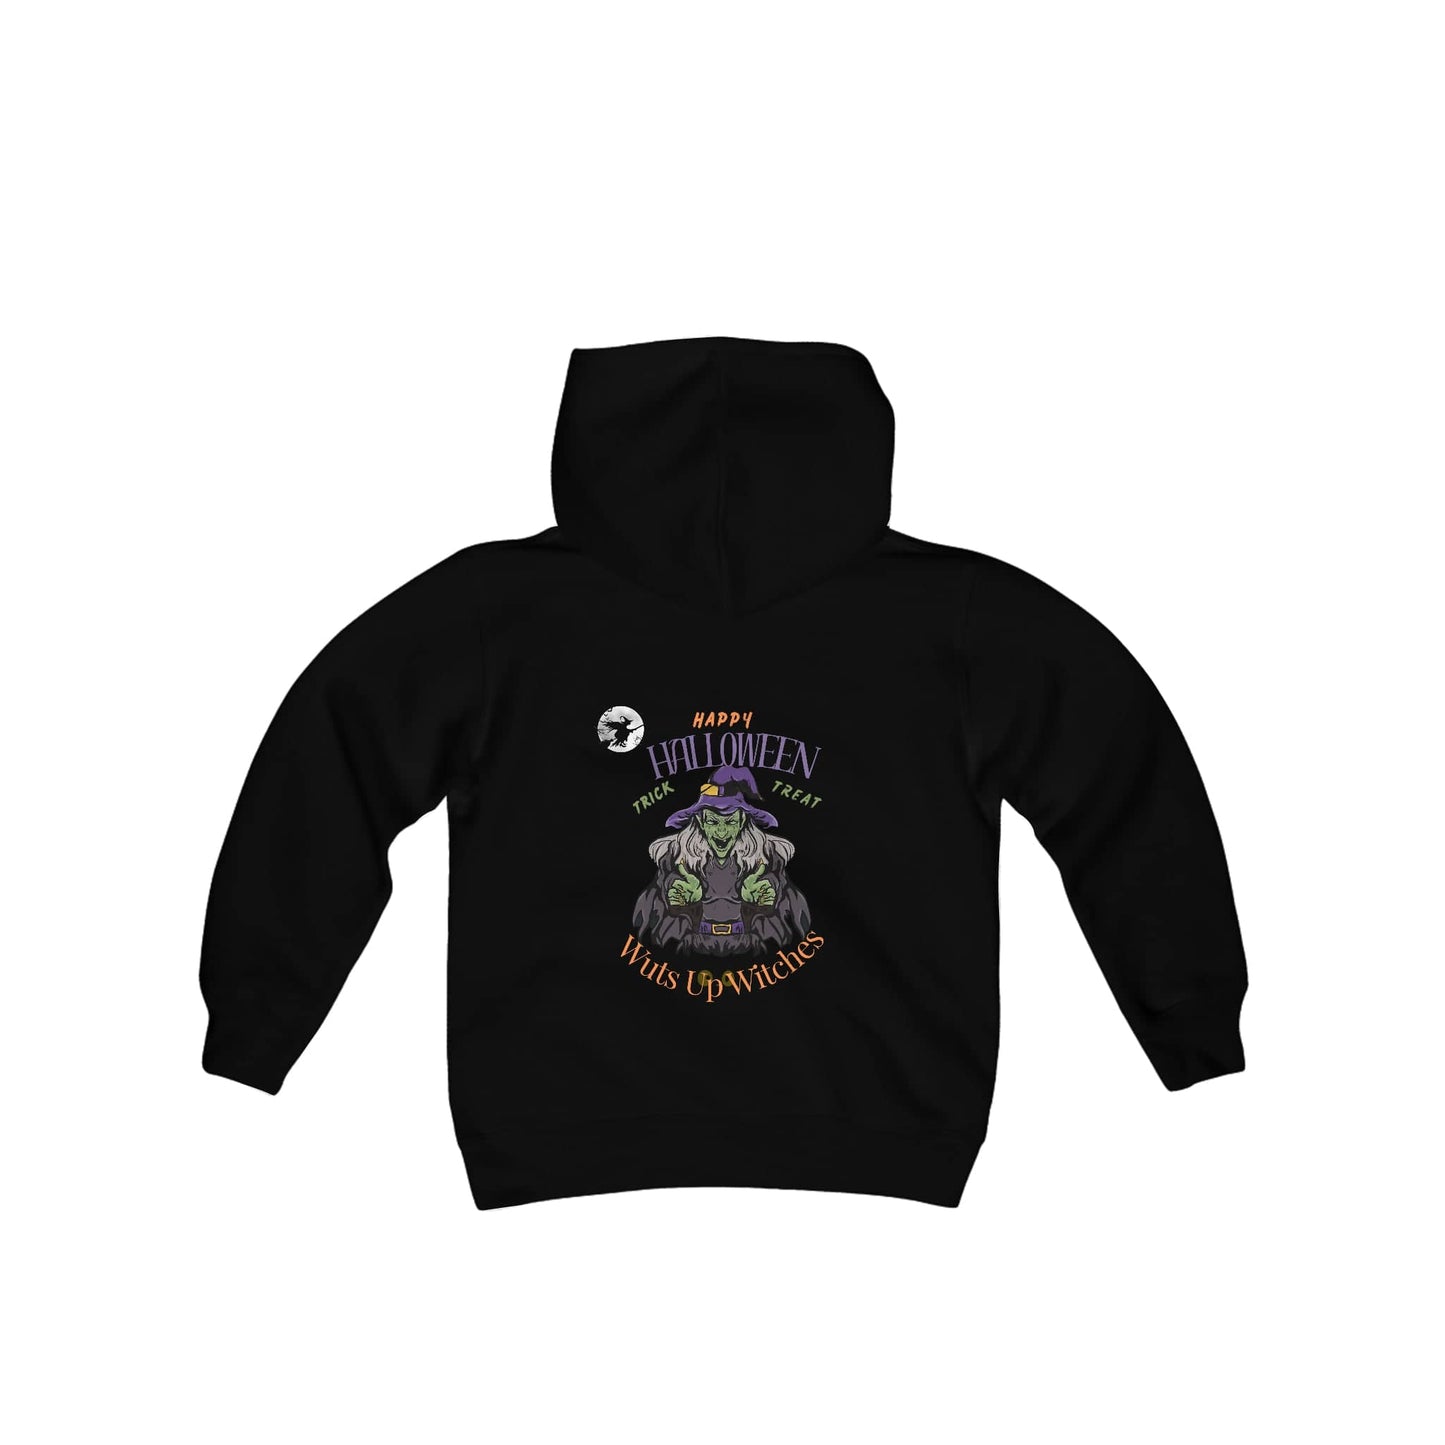 Wuts Up, Witches! Hoodie Kids clothes Bigger Than Life Black S 